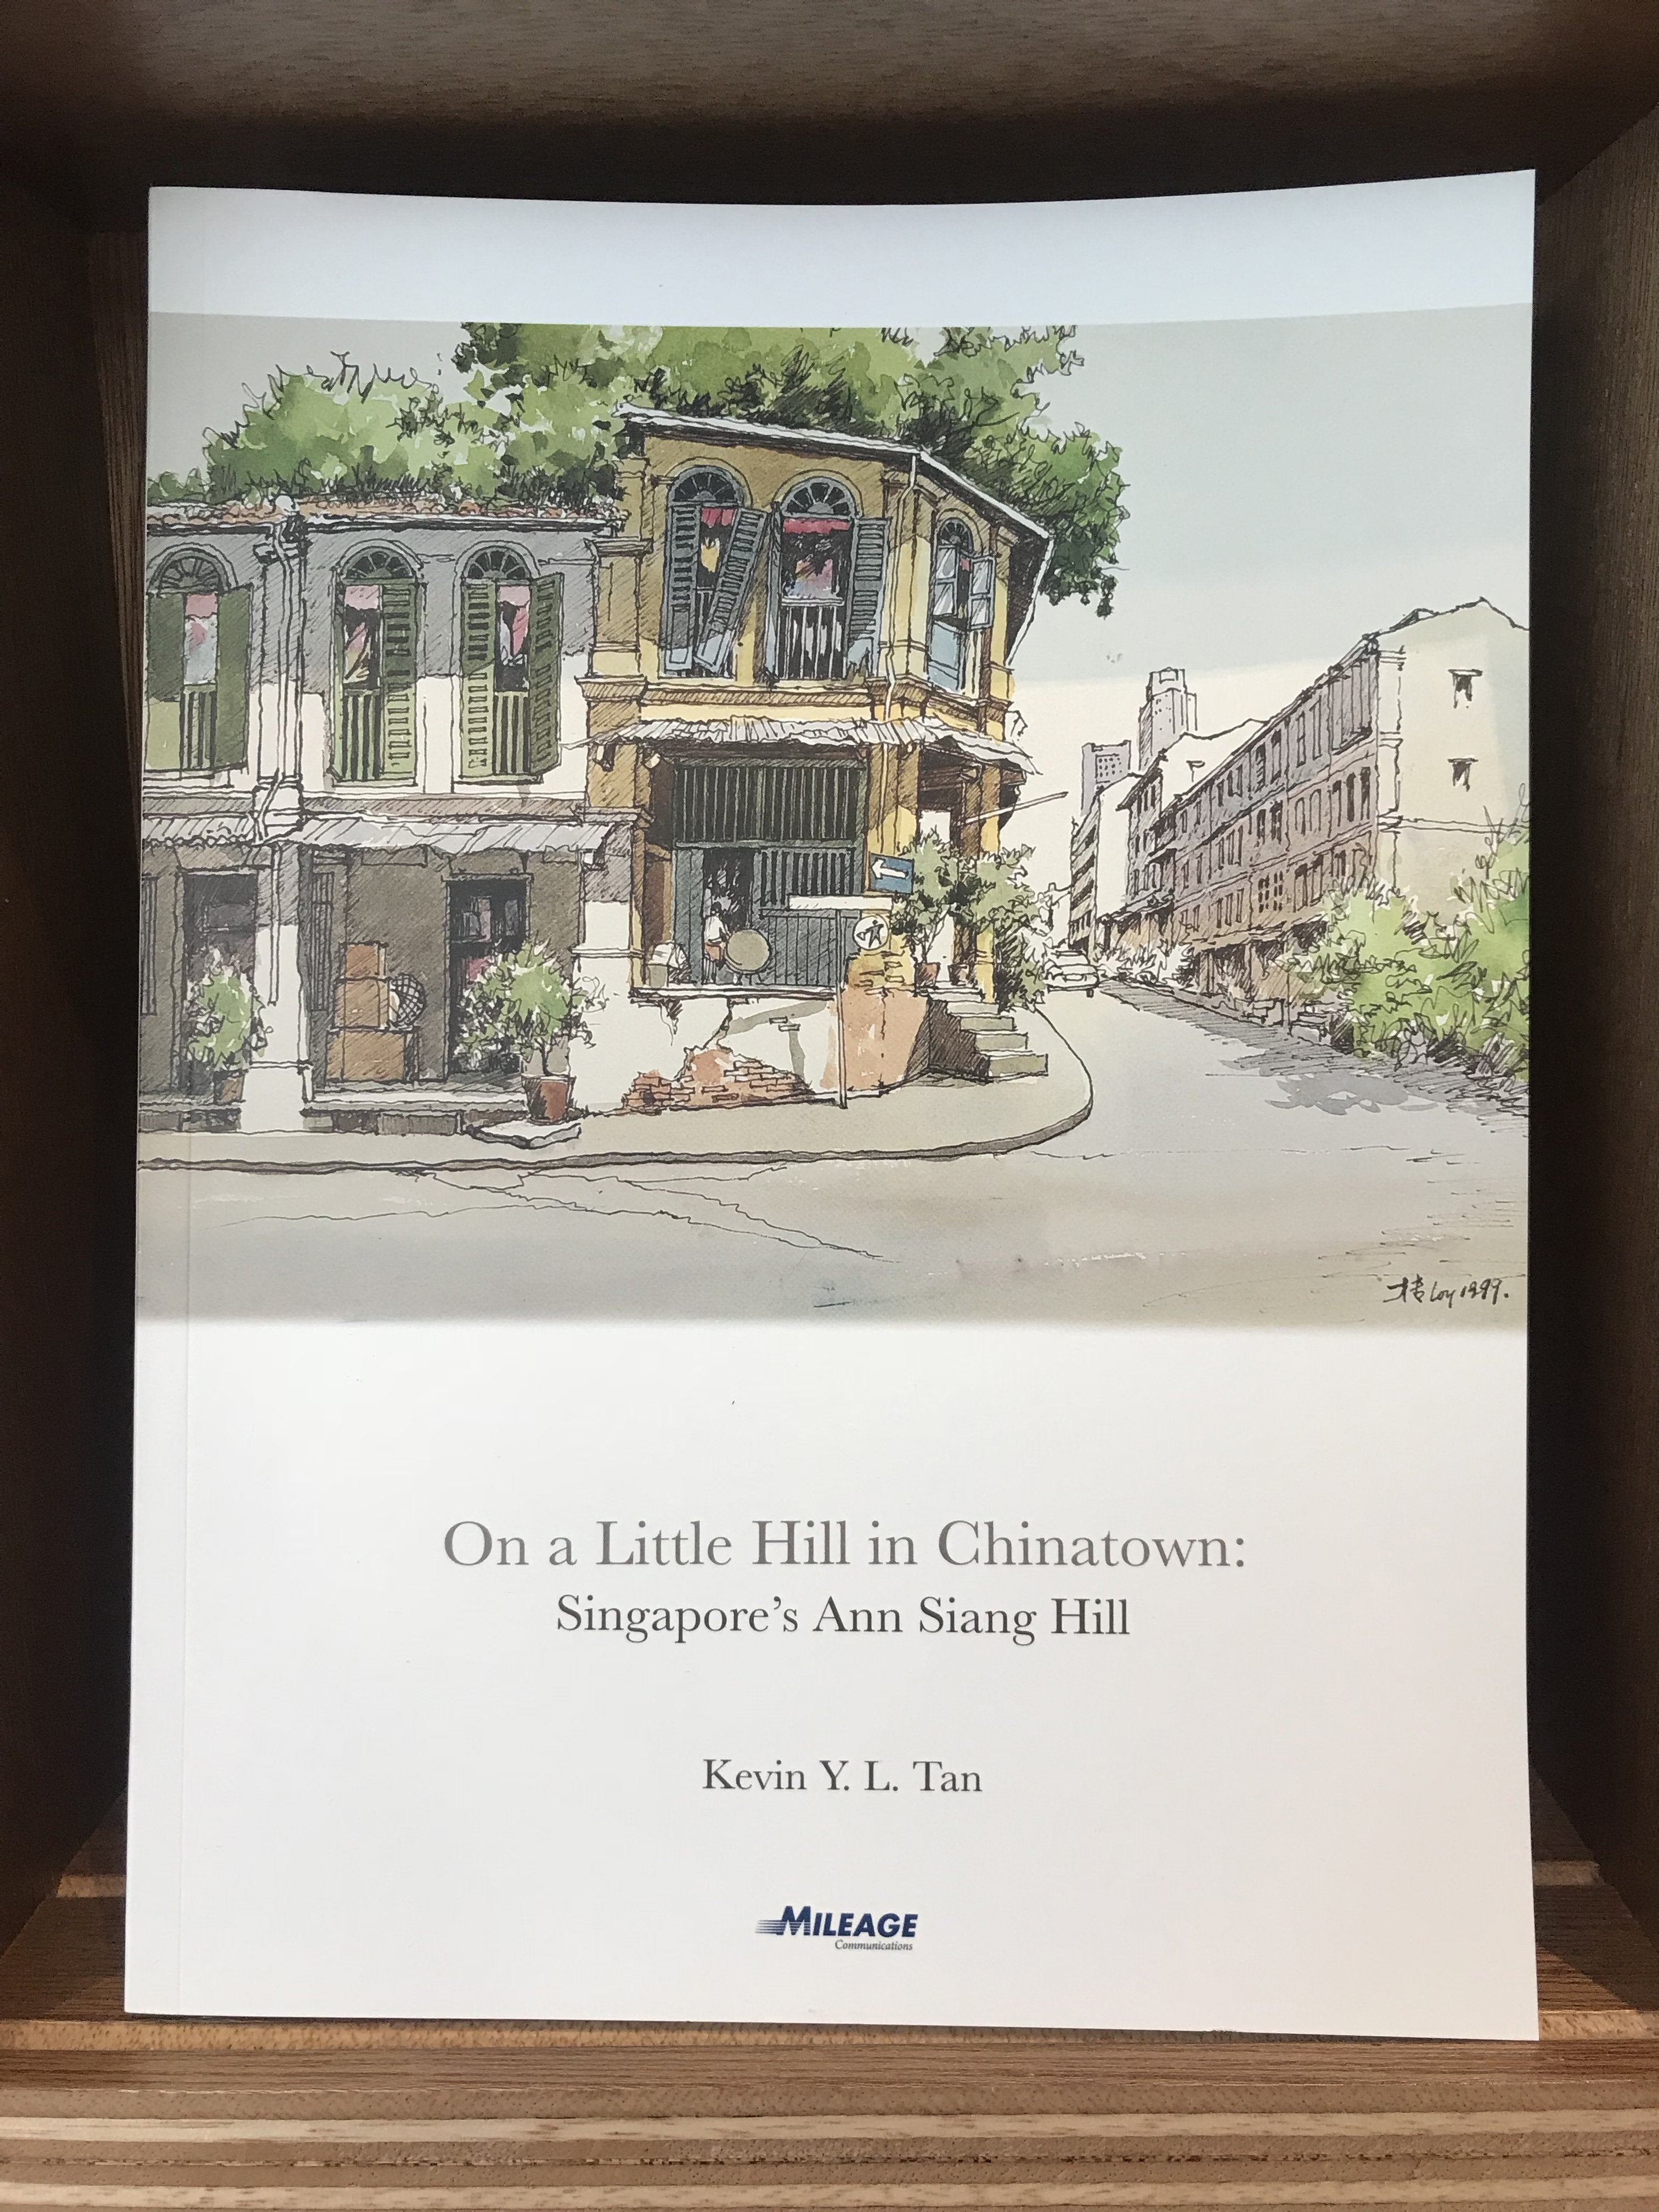 On A Little Hill in Chinatown